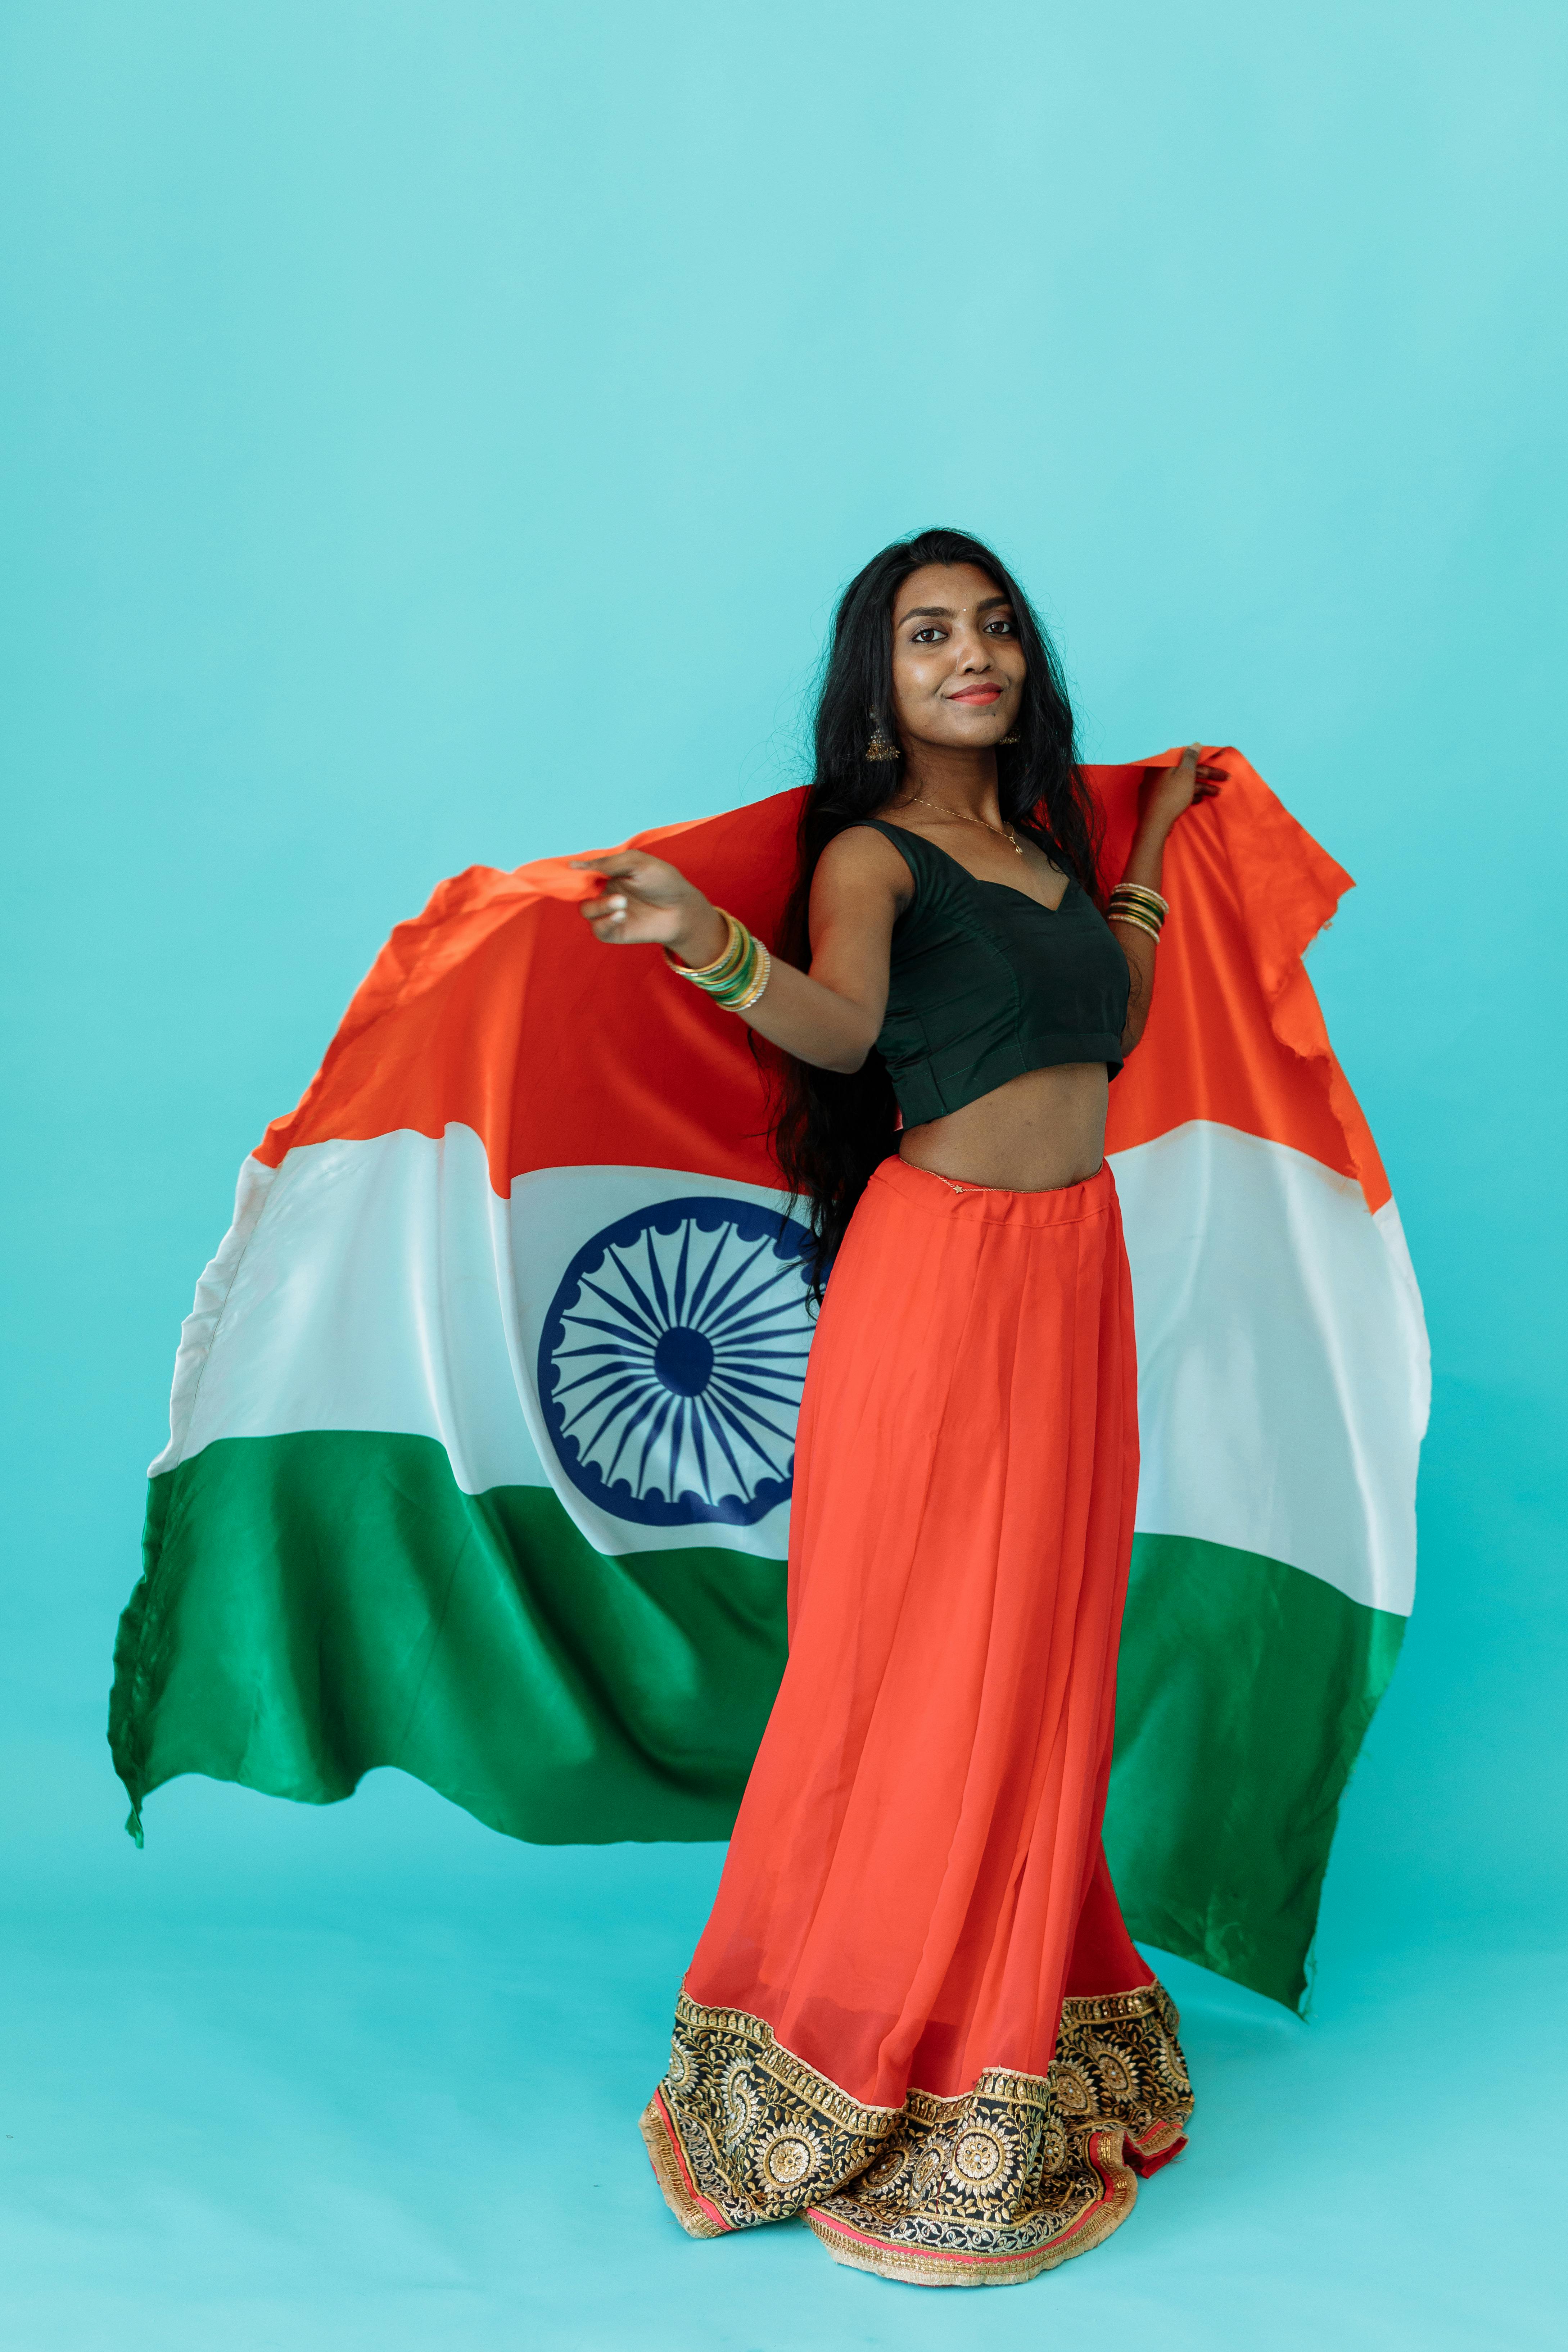 Without name dp | 15 august photo, Profile picture for girls, Republic day  photos